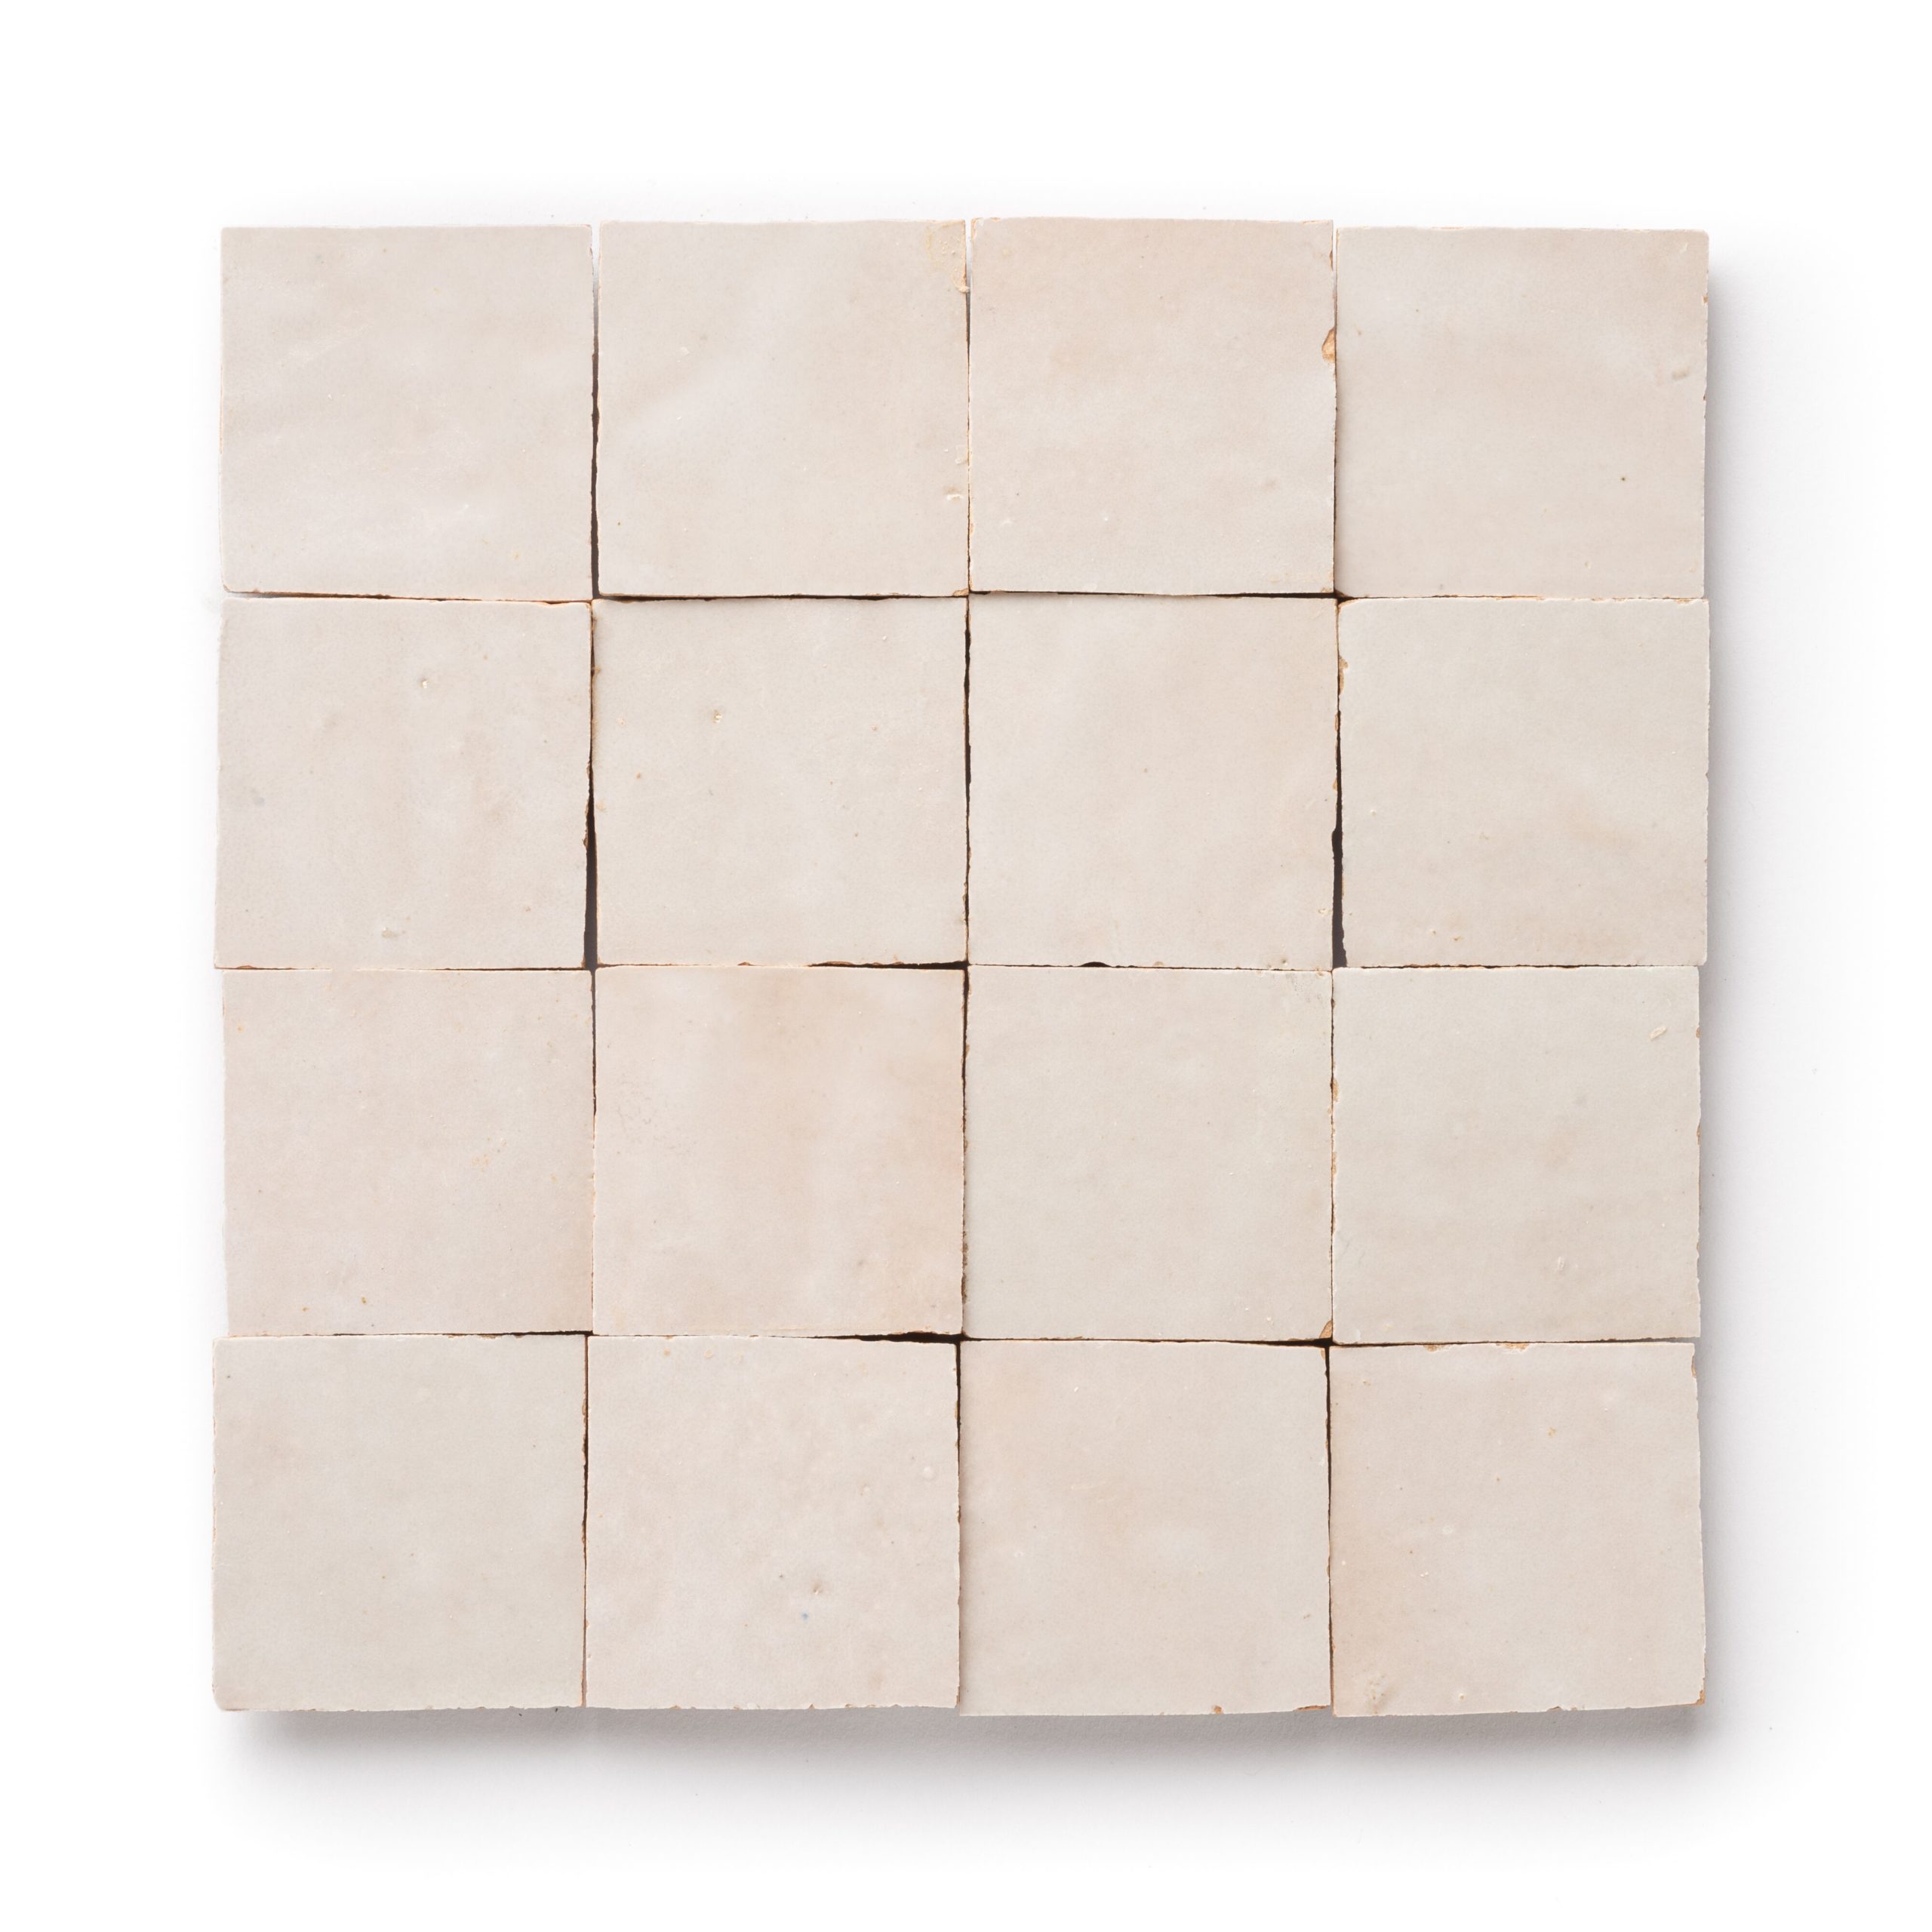 New Zellige Tiles Available | Uncoated Natural Tile | Riad Tile